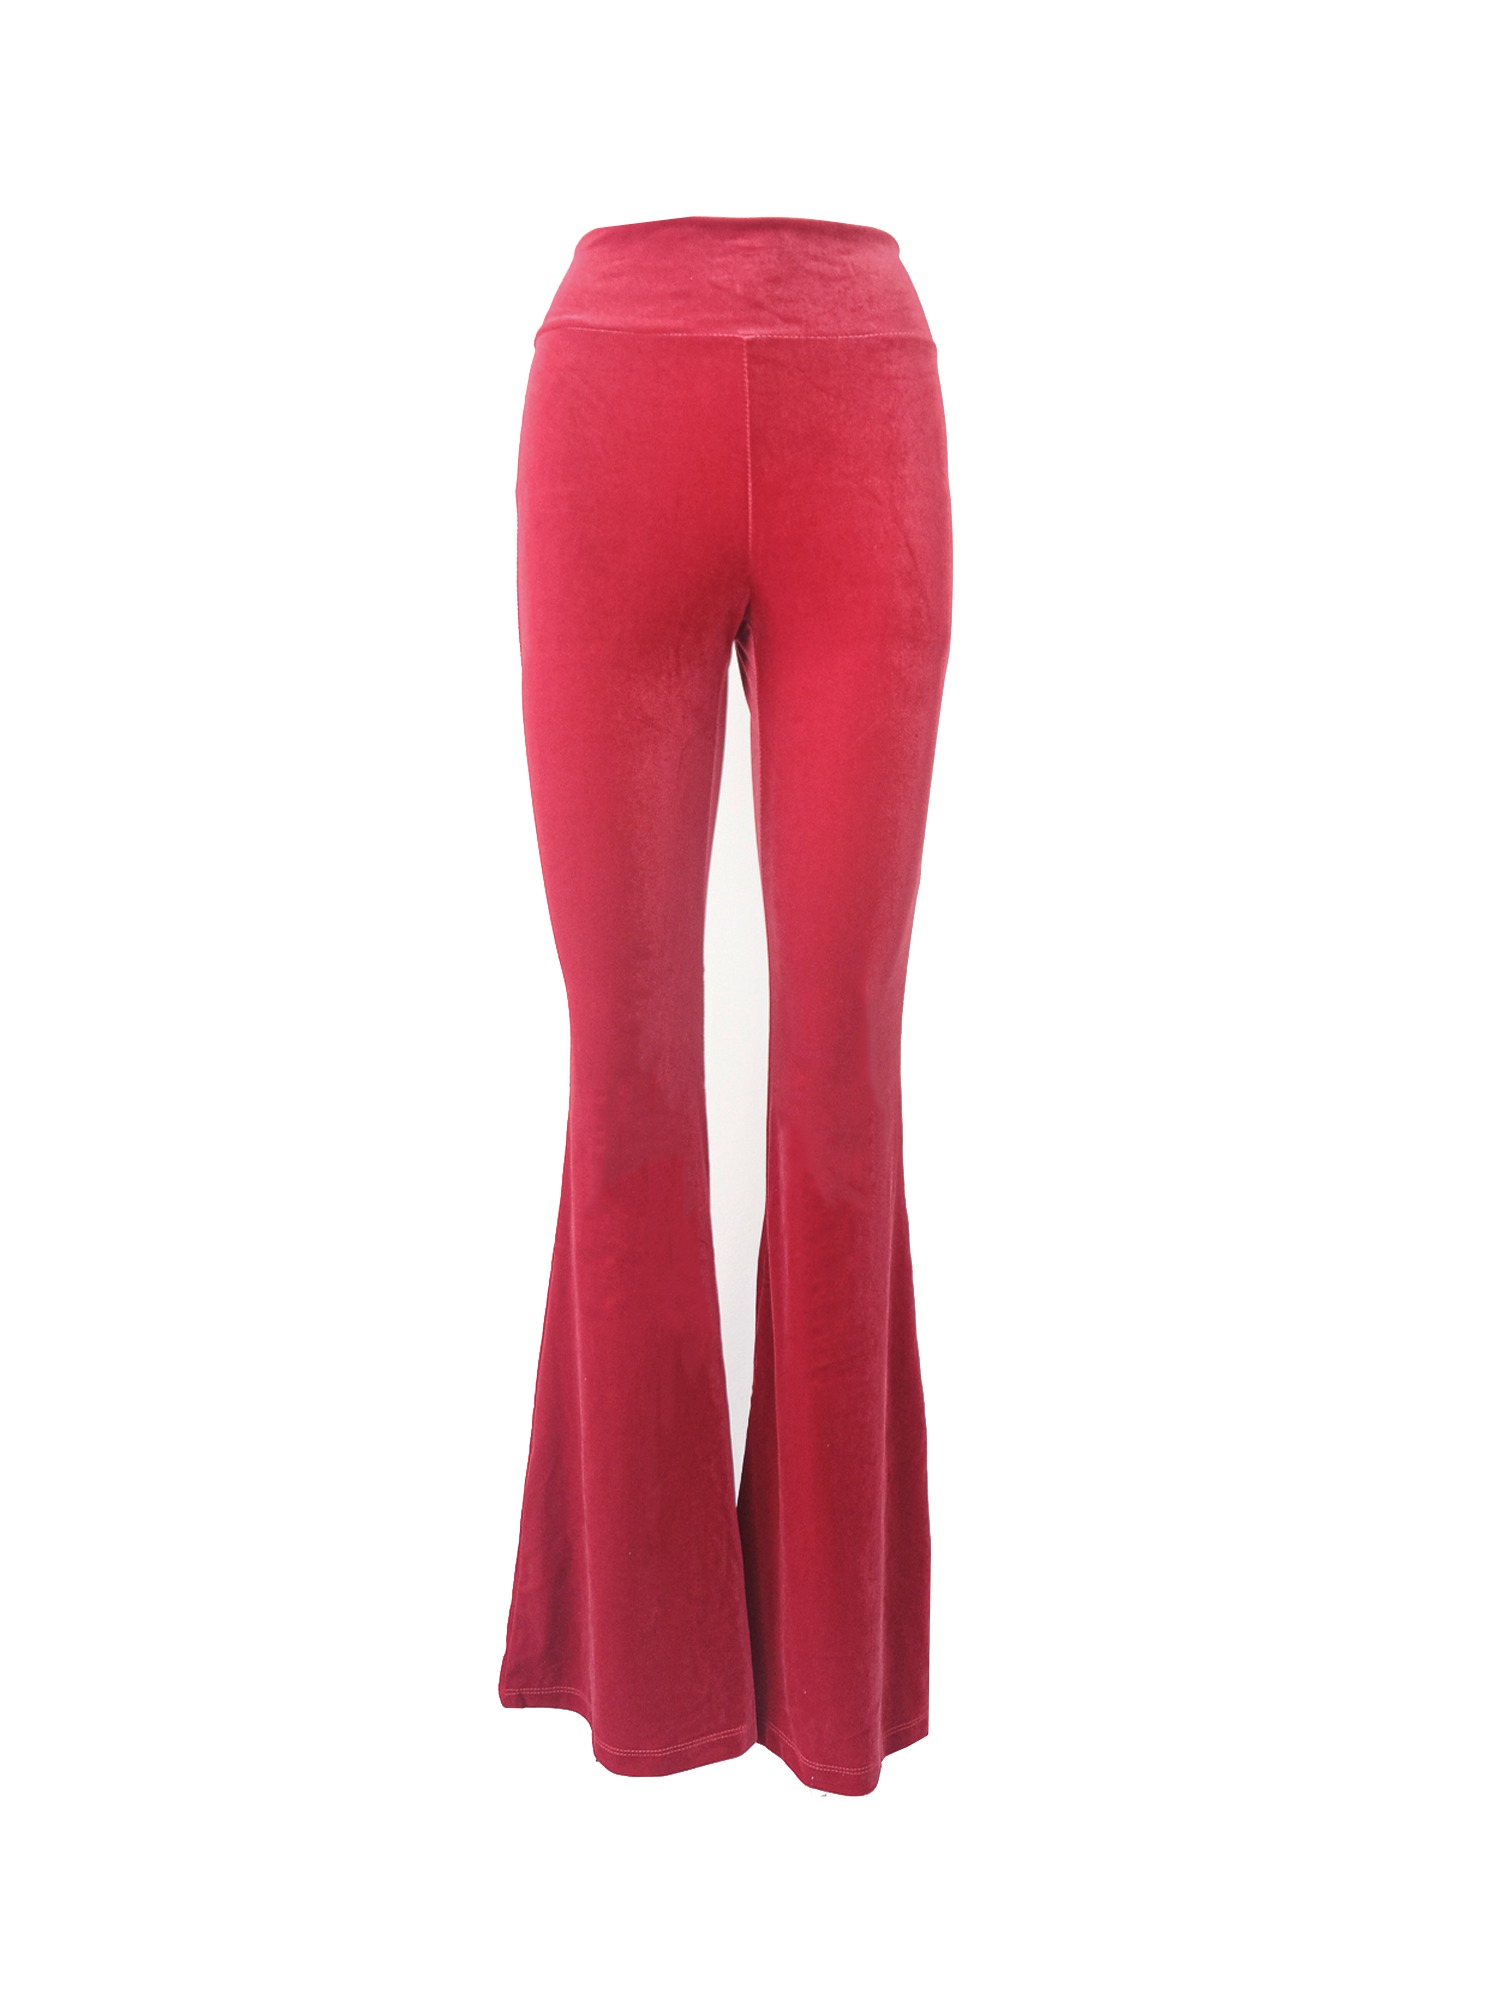 LOLA - flared trousers with high waist in red chenille